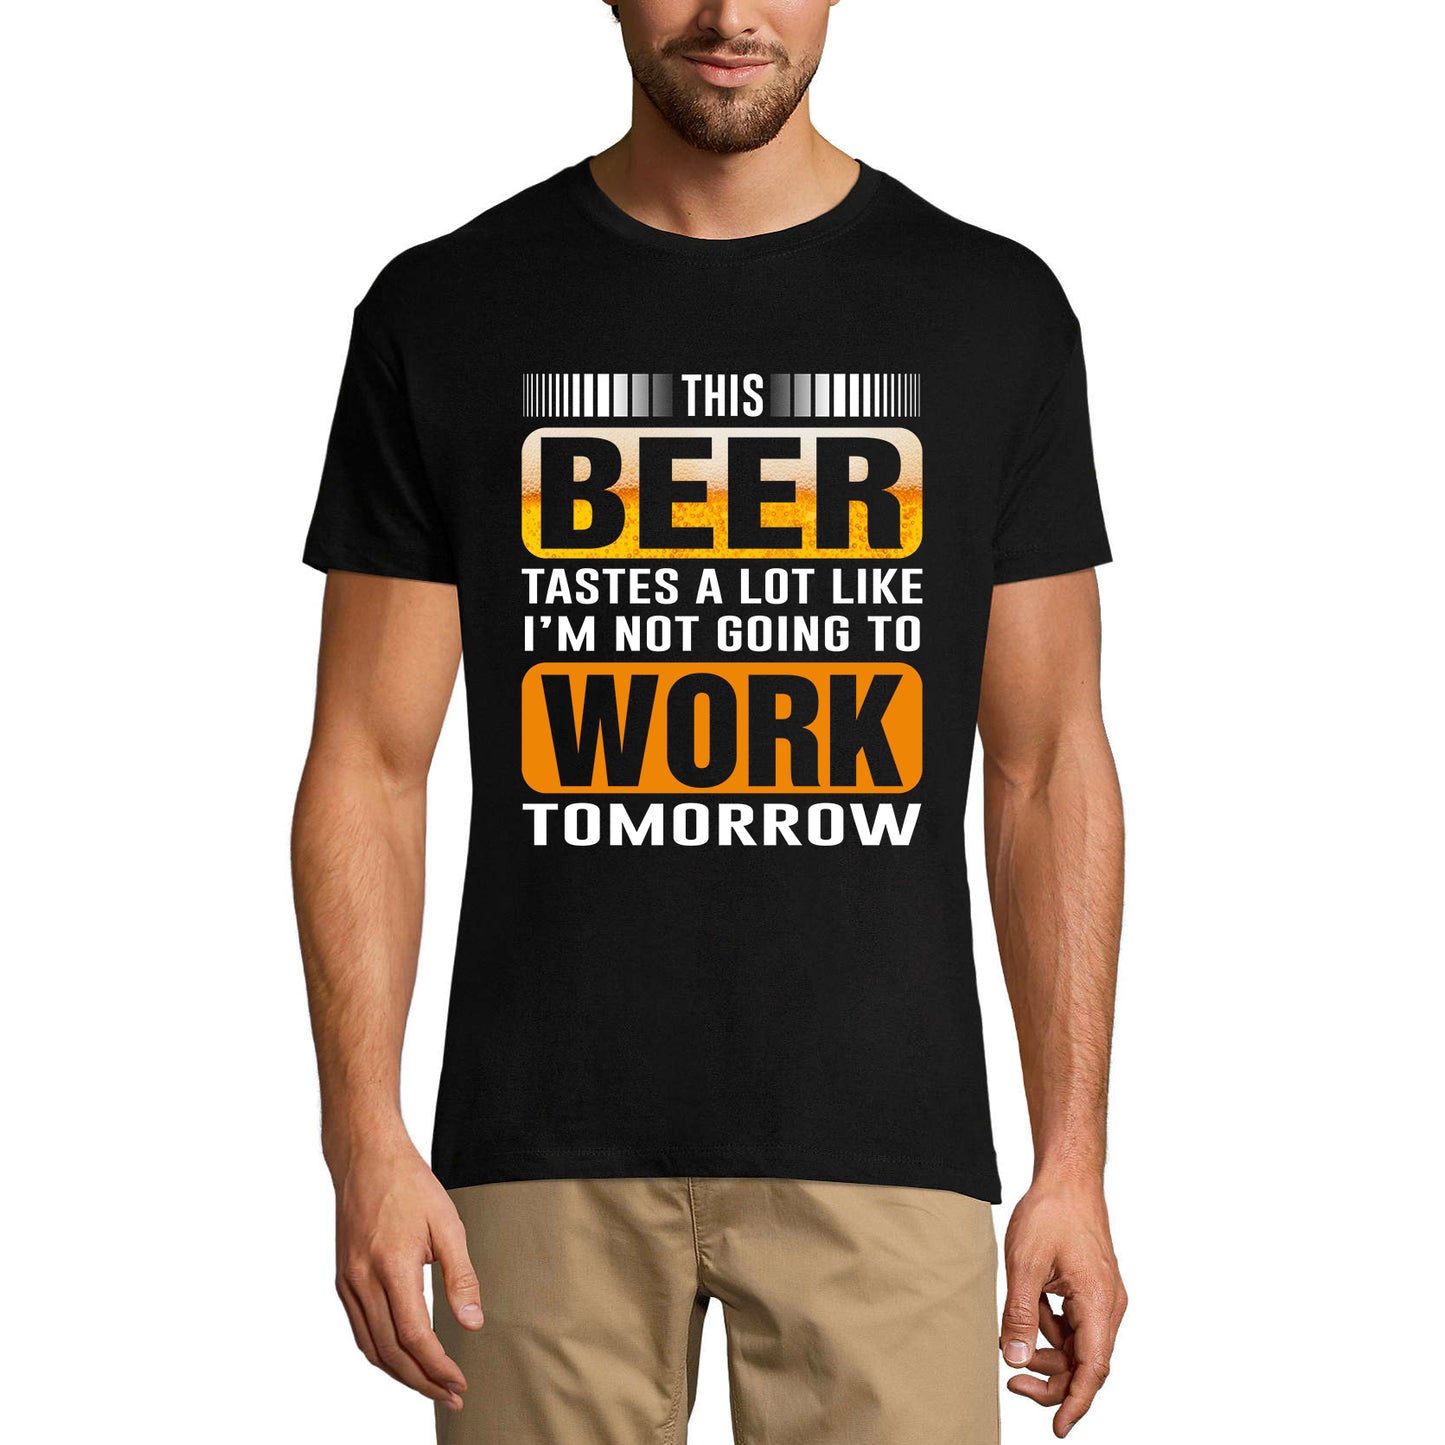 ULTRABASIC Men's T-Shirt This Beer Tastes a Lot Like I'm Not Going to Work Tomorrow - Beer Lover Tee Shirt